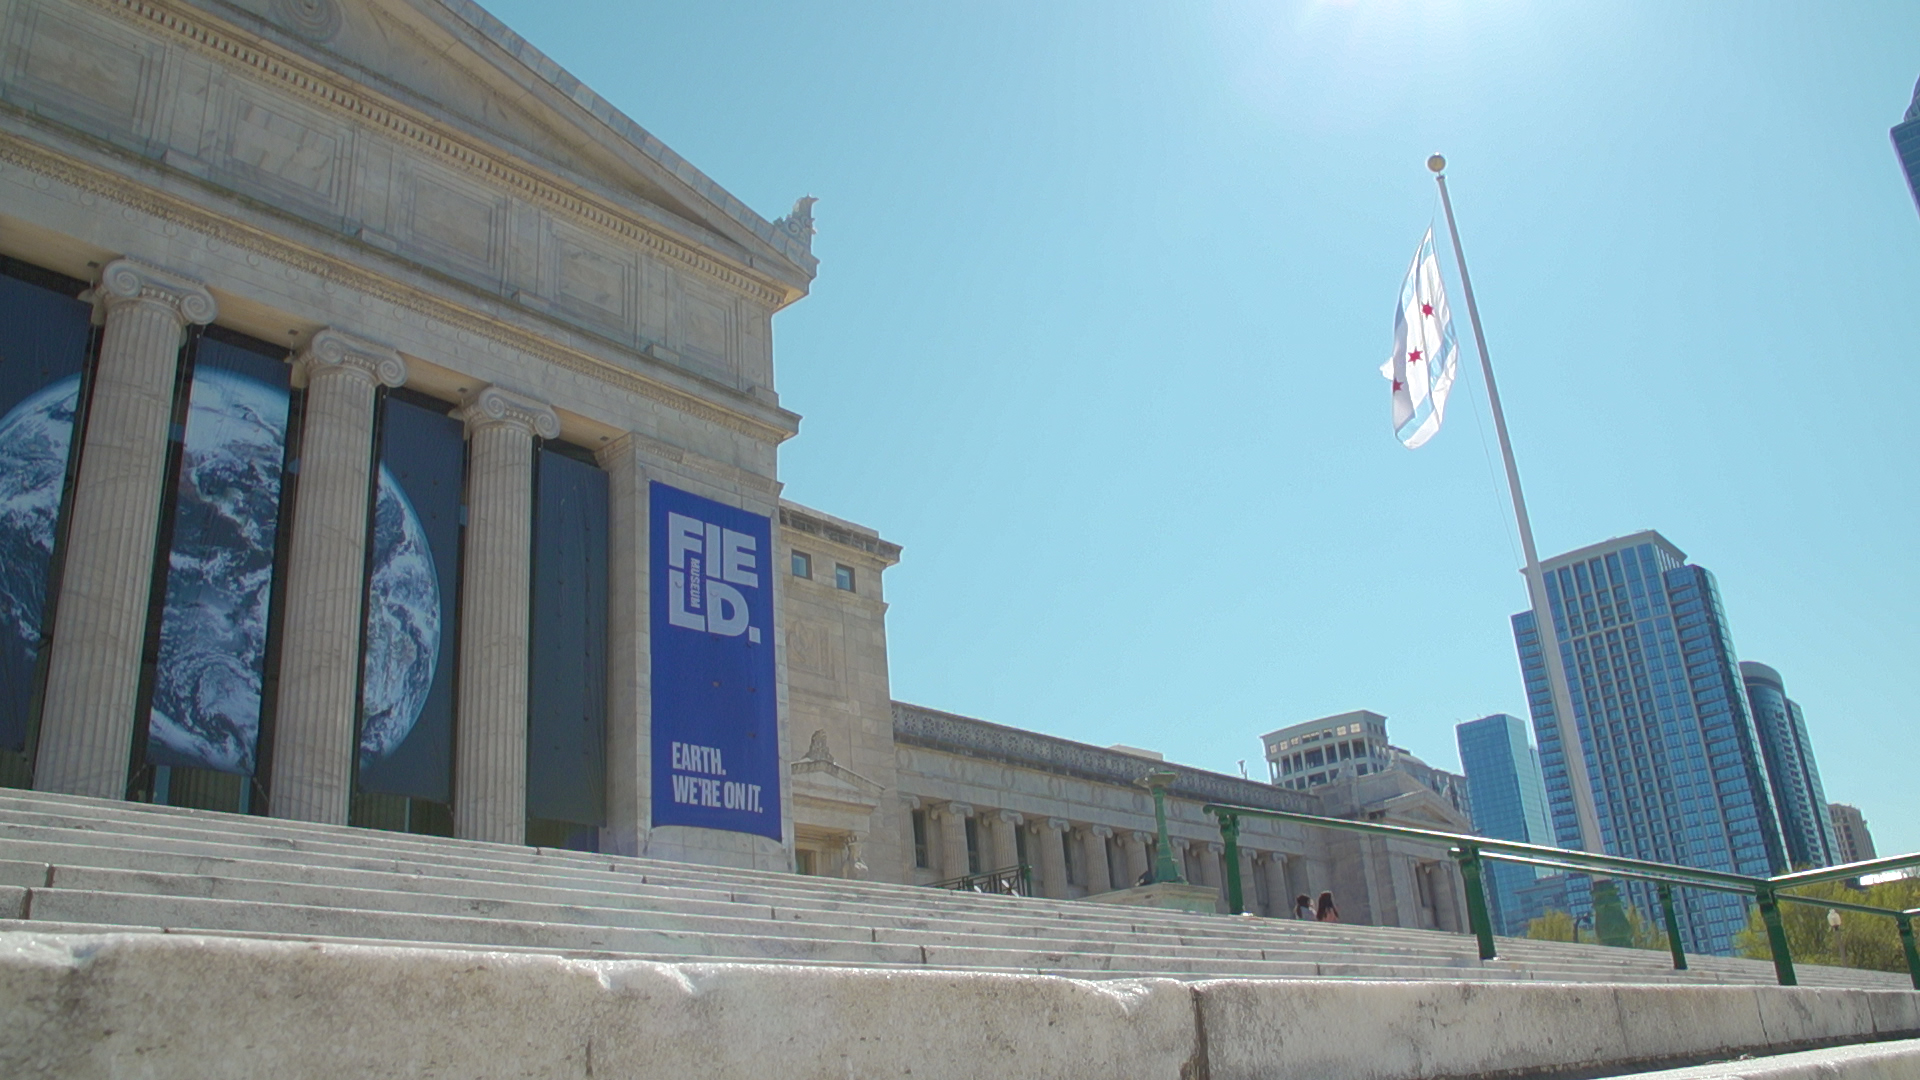 A photo from outside the Field Museum in Chicago.